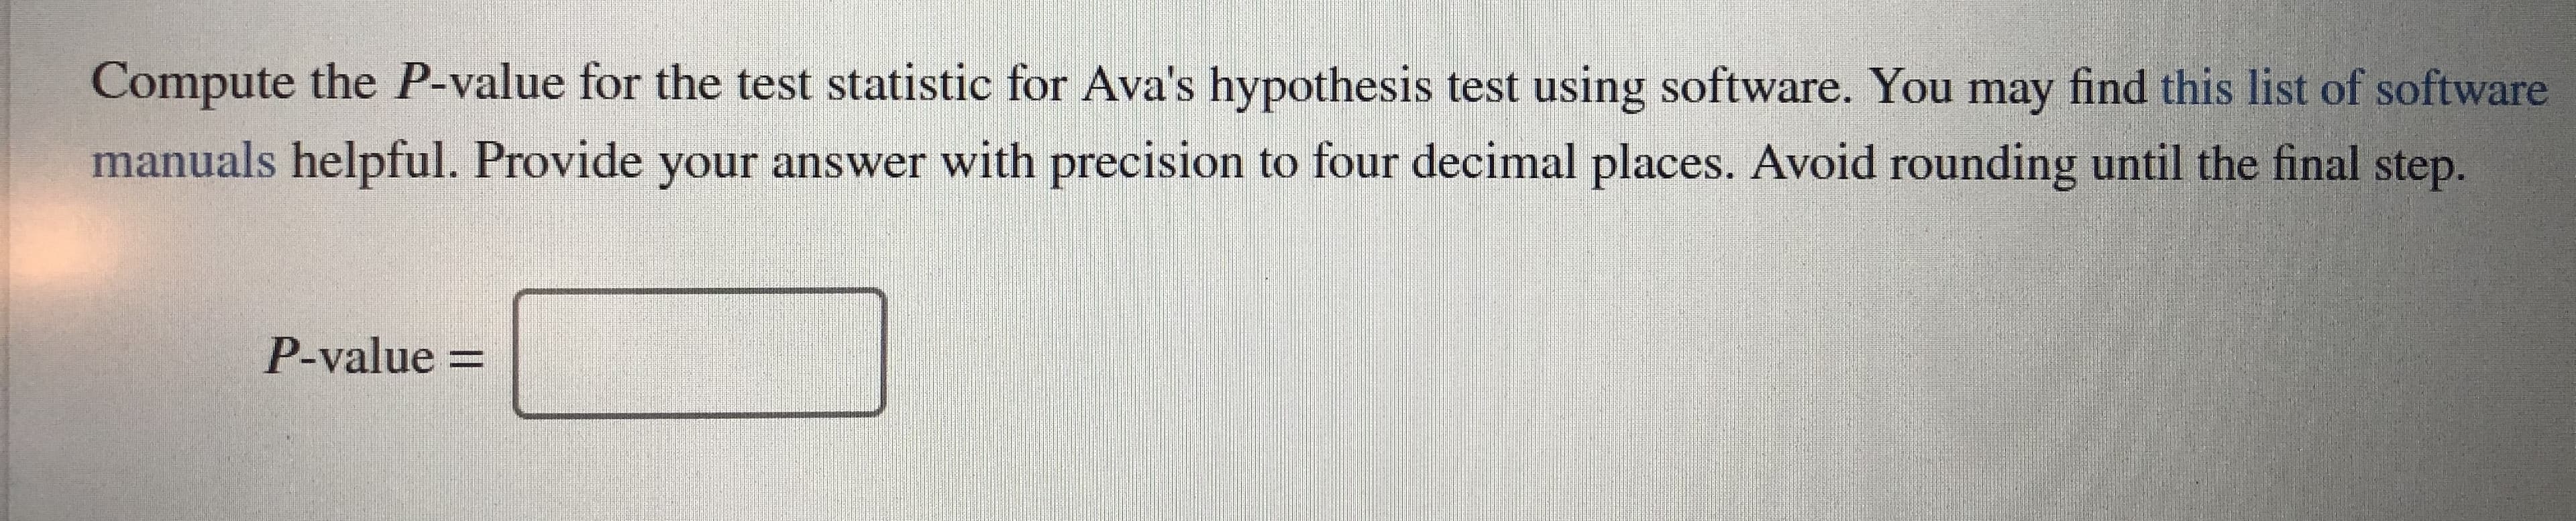 Compute the P-value for the test statistic for Ava's hypothesis test using software. You may find this list of software
manuals helpful. Provide your answer with precision to four decimal places. Avoid rounding until the final step.
P-value =
